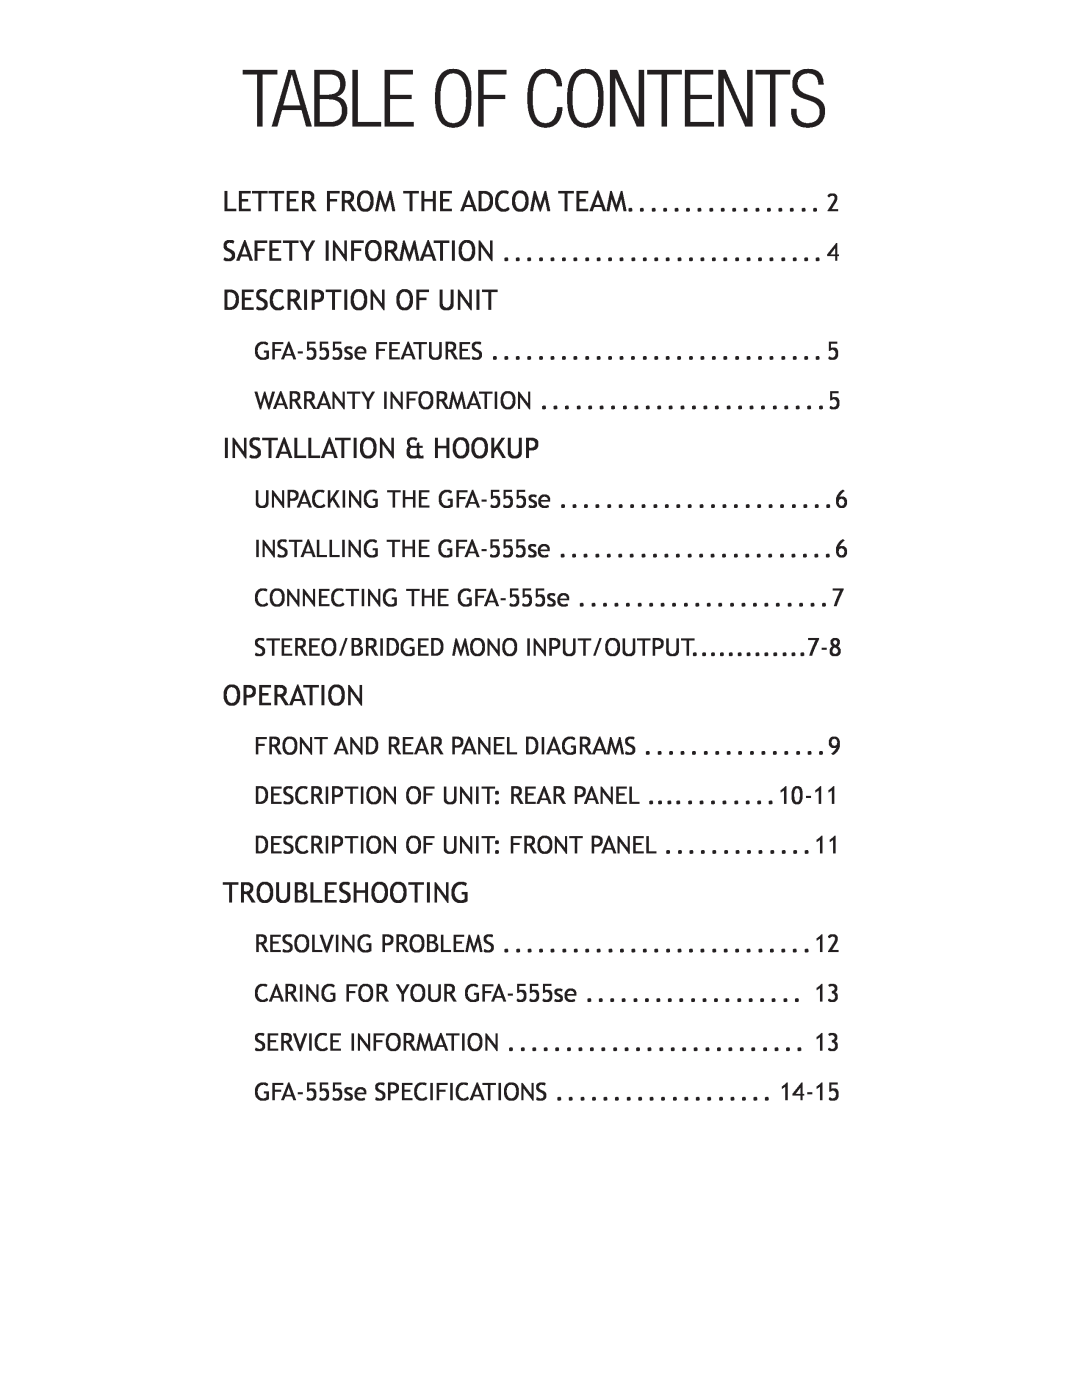 Adcom GFA-555se Table Of Contents, Letter From The Adcom Team, Description Of Unit, Installation & Hookup, Operation 